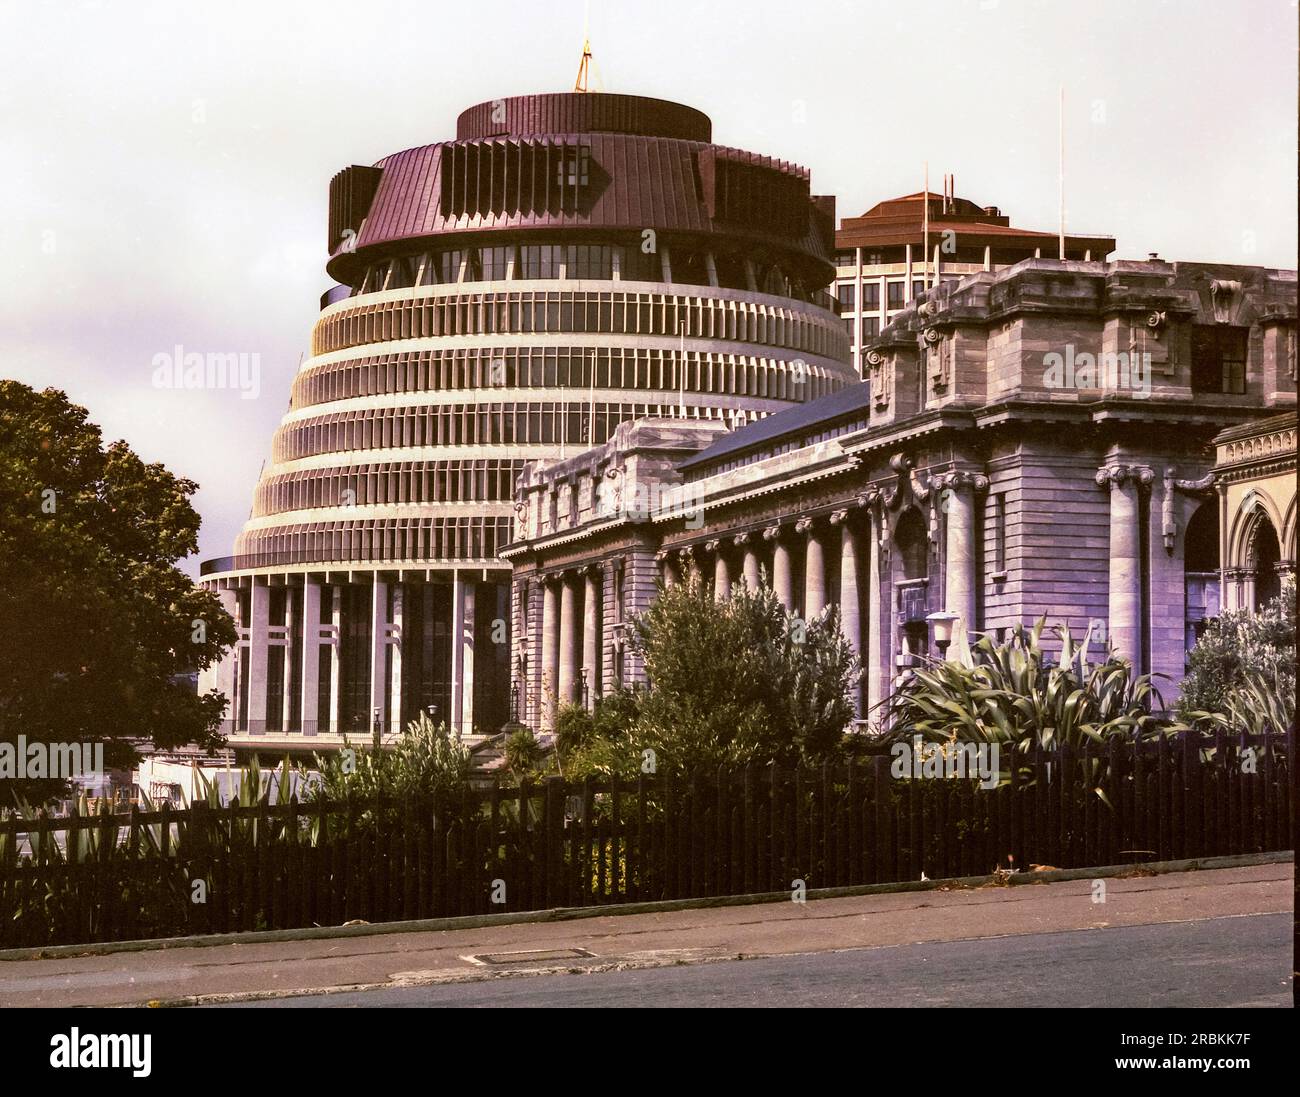 A 1981 historical image of The Beehive (Te Whare Mīere), the common name for the Executive Wing of New Zealand Parliament Buildings in the city of Wellington on the north island of New Zealand. 1981 was the year the building was finally completed after construction began in 1969. Stock Photo